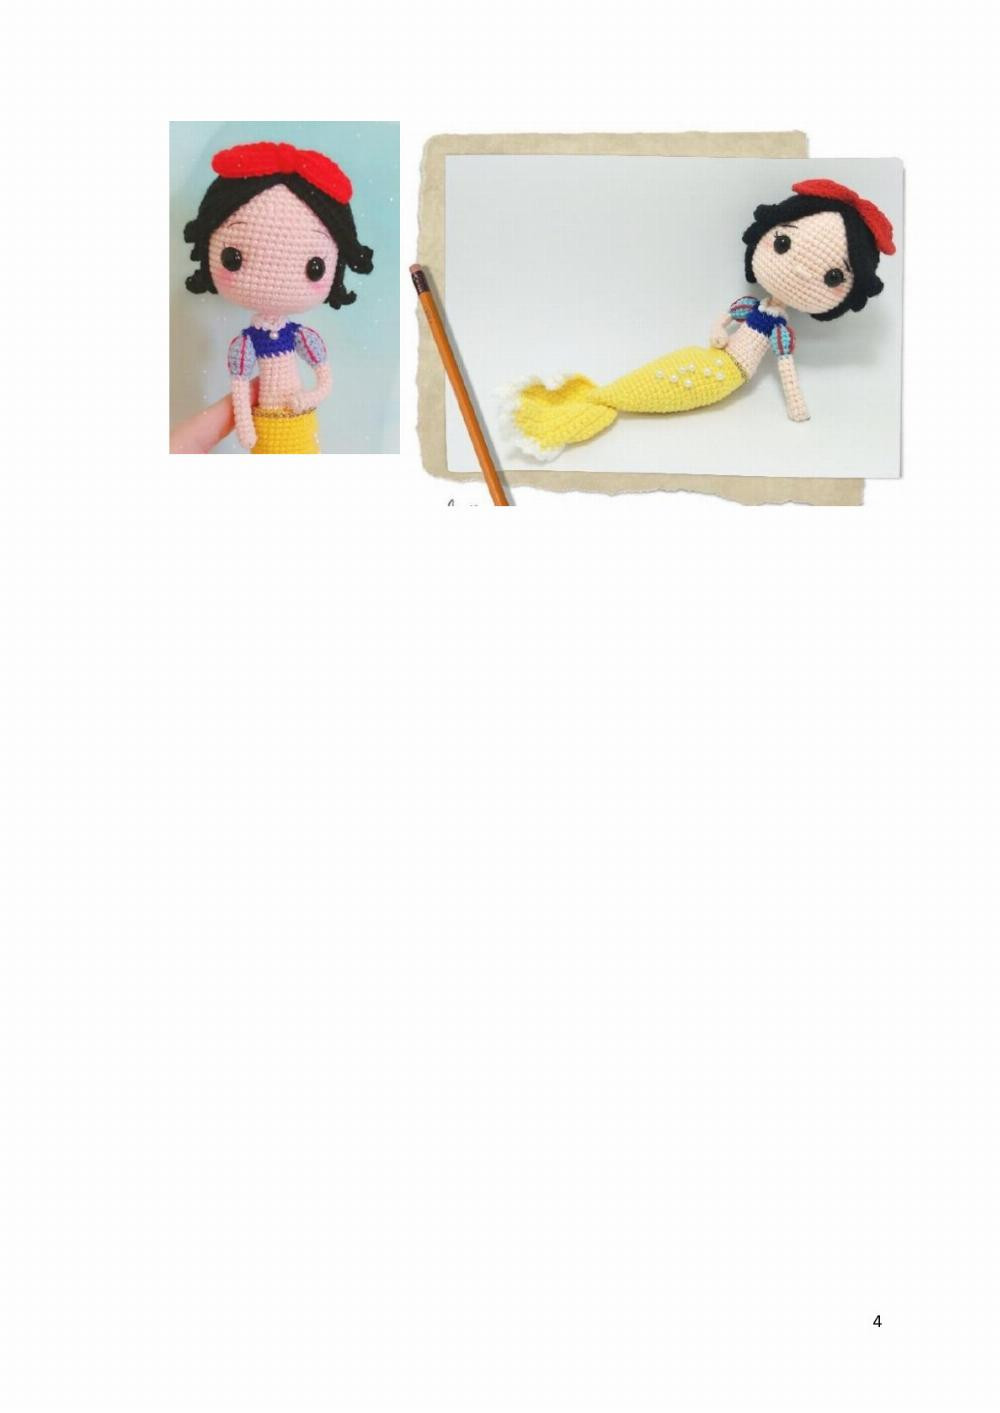 Snow white with a red bow crochet pattern